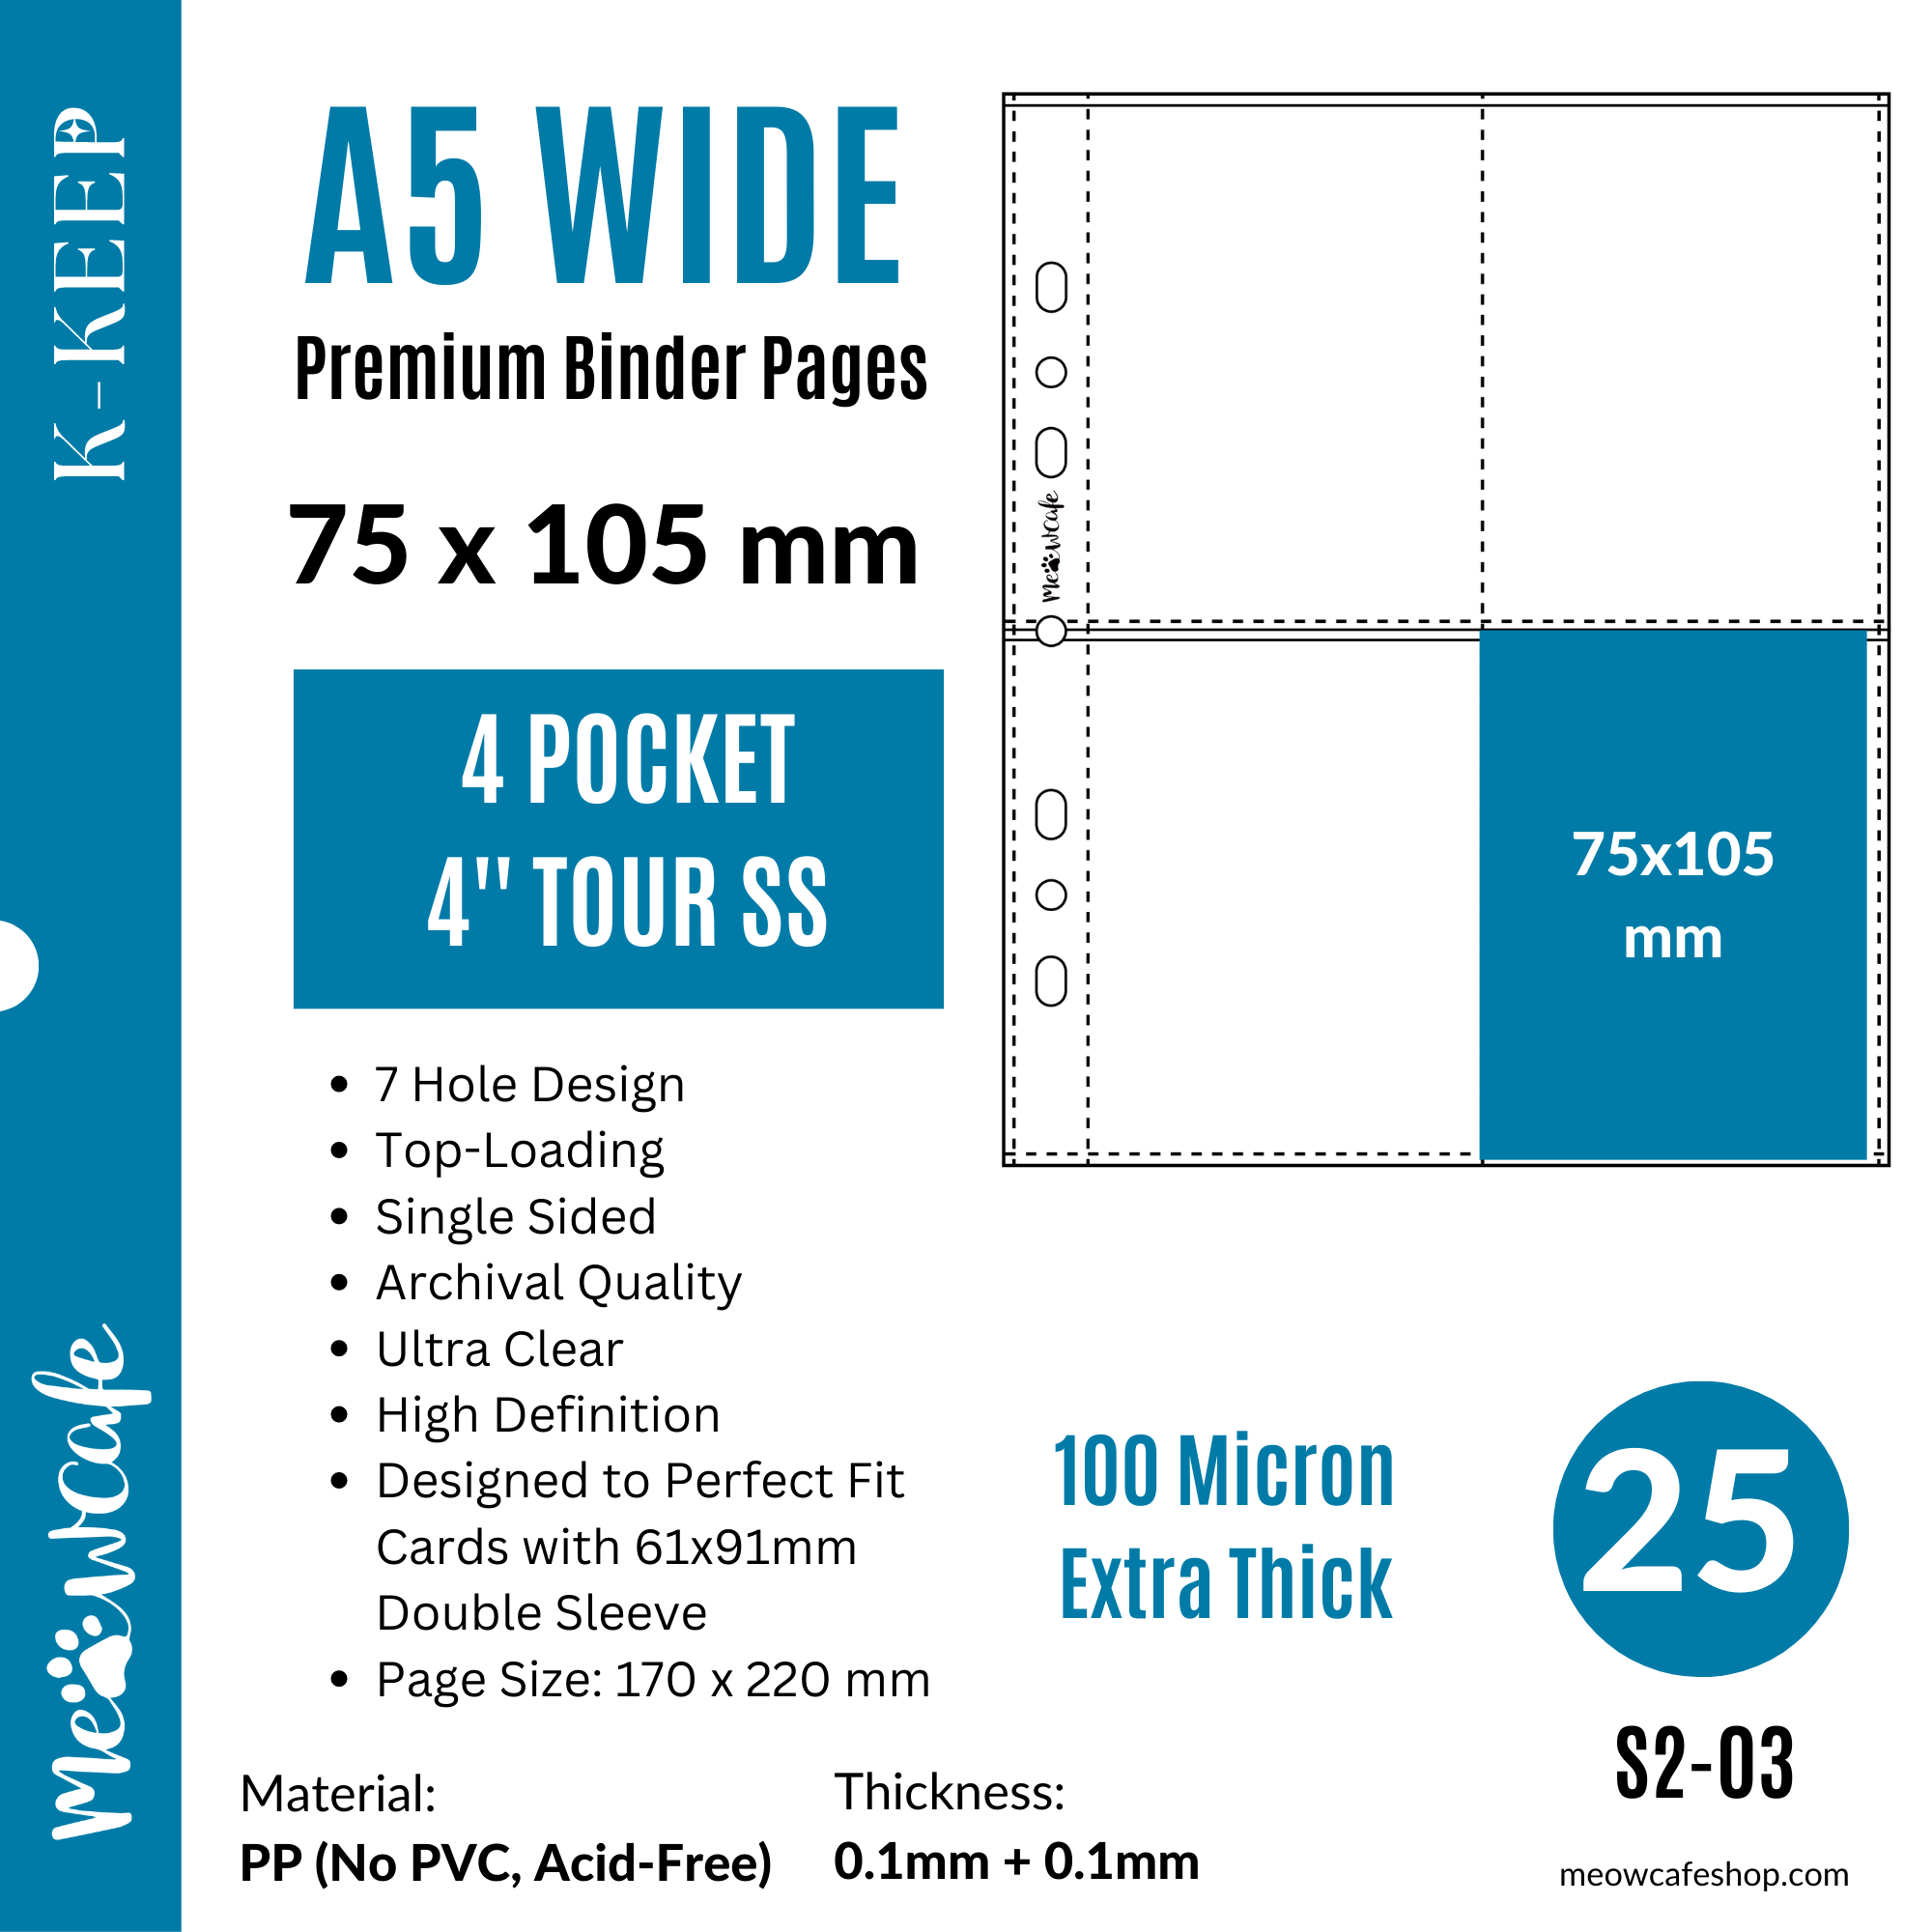 K-KEEP [A5 Wide] - 4 Pocket Tour 75x105MM, 7 Holes Premium Binder Pages, 100 Micron Thick, High Definition (Pack of 25)